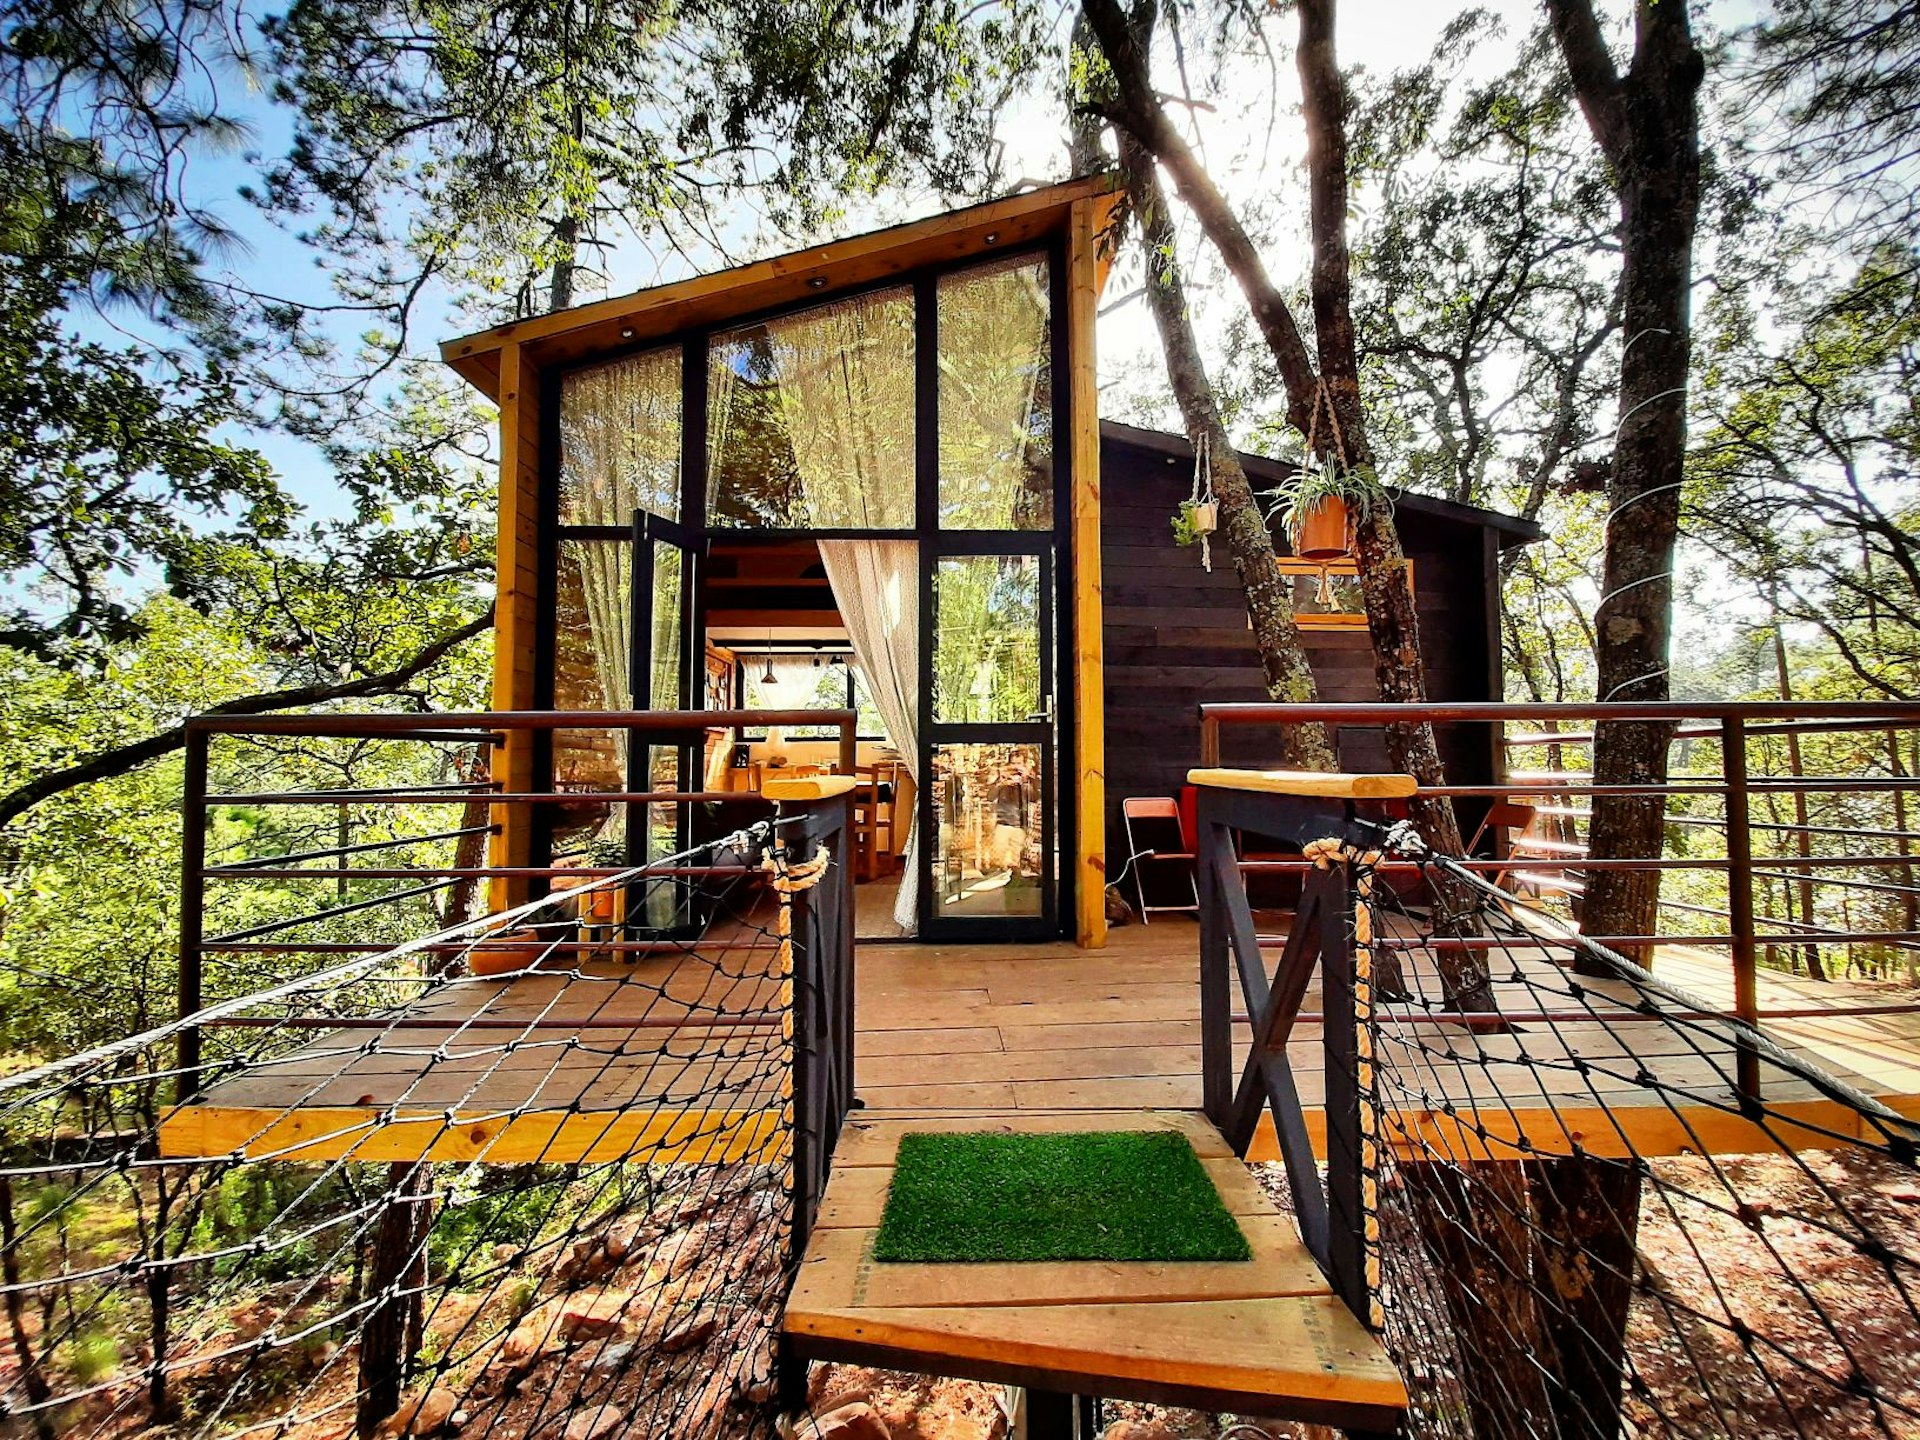 A picture of the treehouse and the access walkway